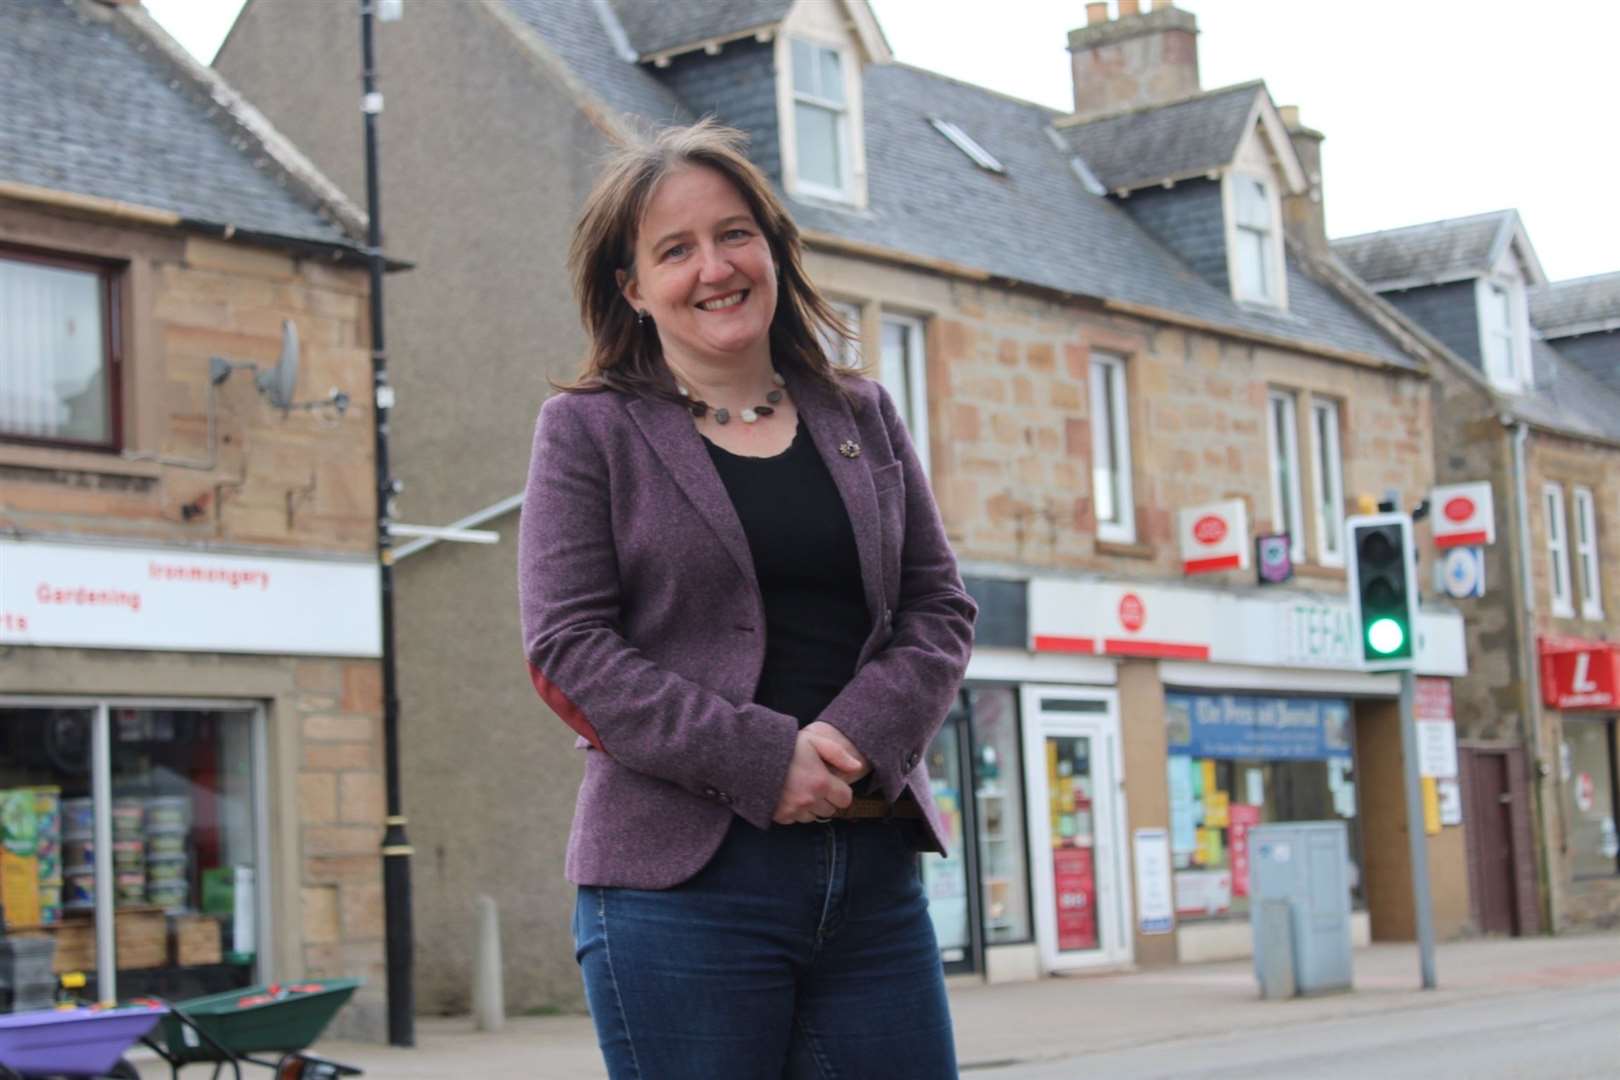 Maree Todd MSP: “I know that many of my constituents are struggling right now as rising costs place significant pressures on household budgets."